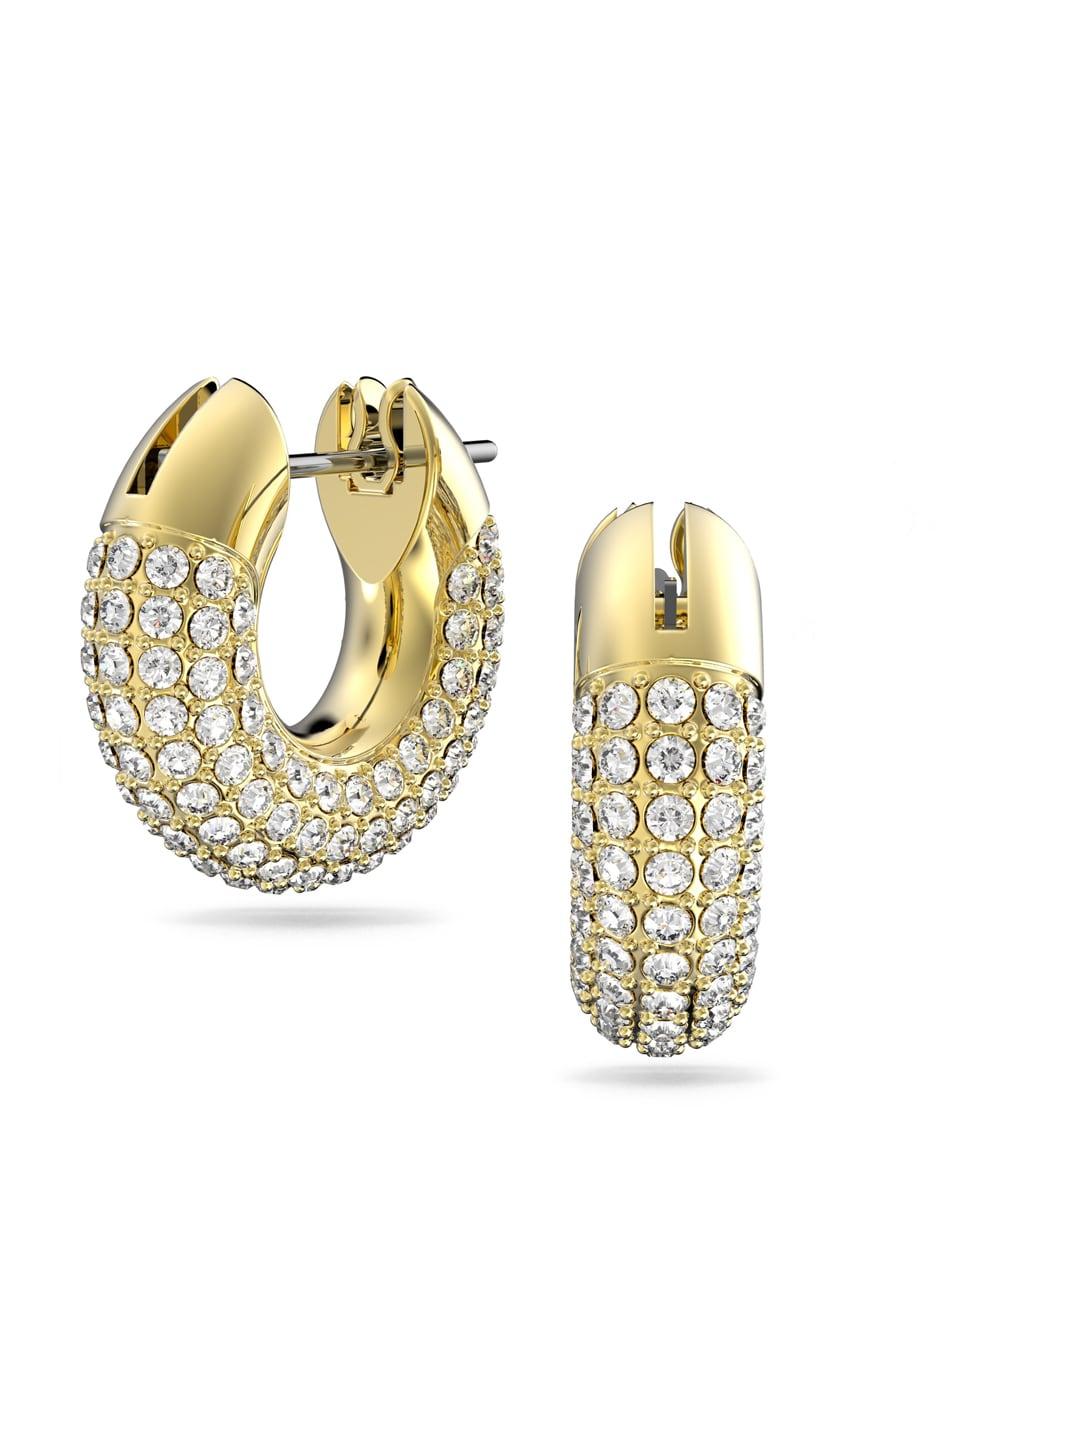 SWAROVSKI Gold-Toned Crystals Contemporary Hoop Earrings